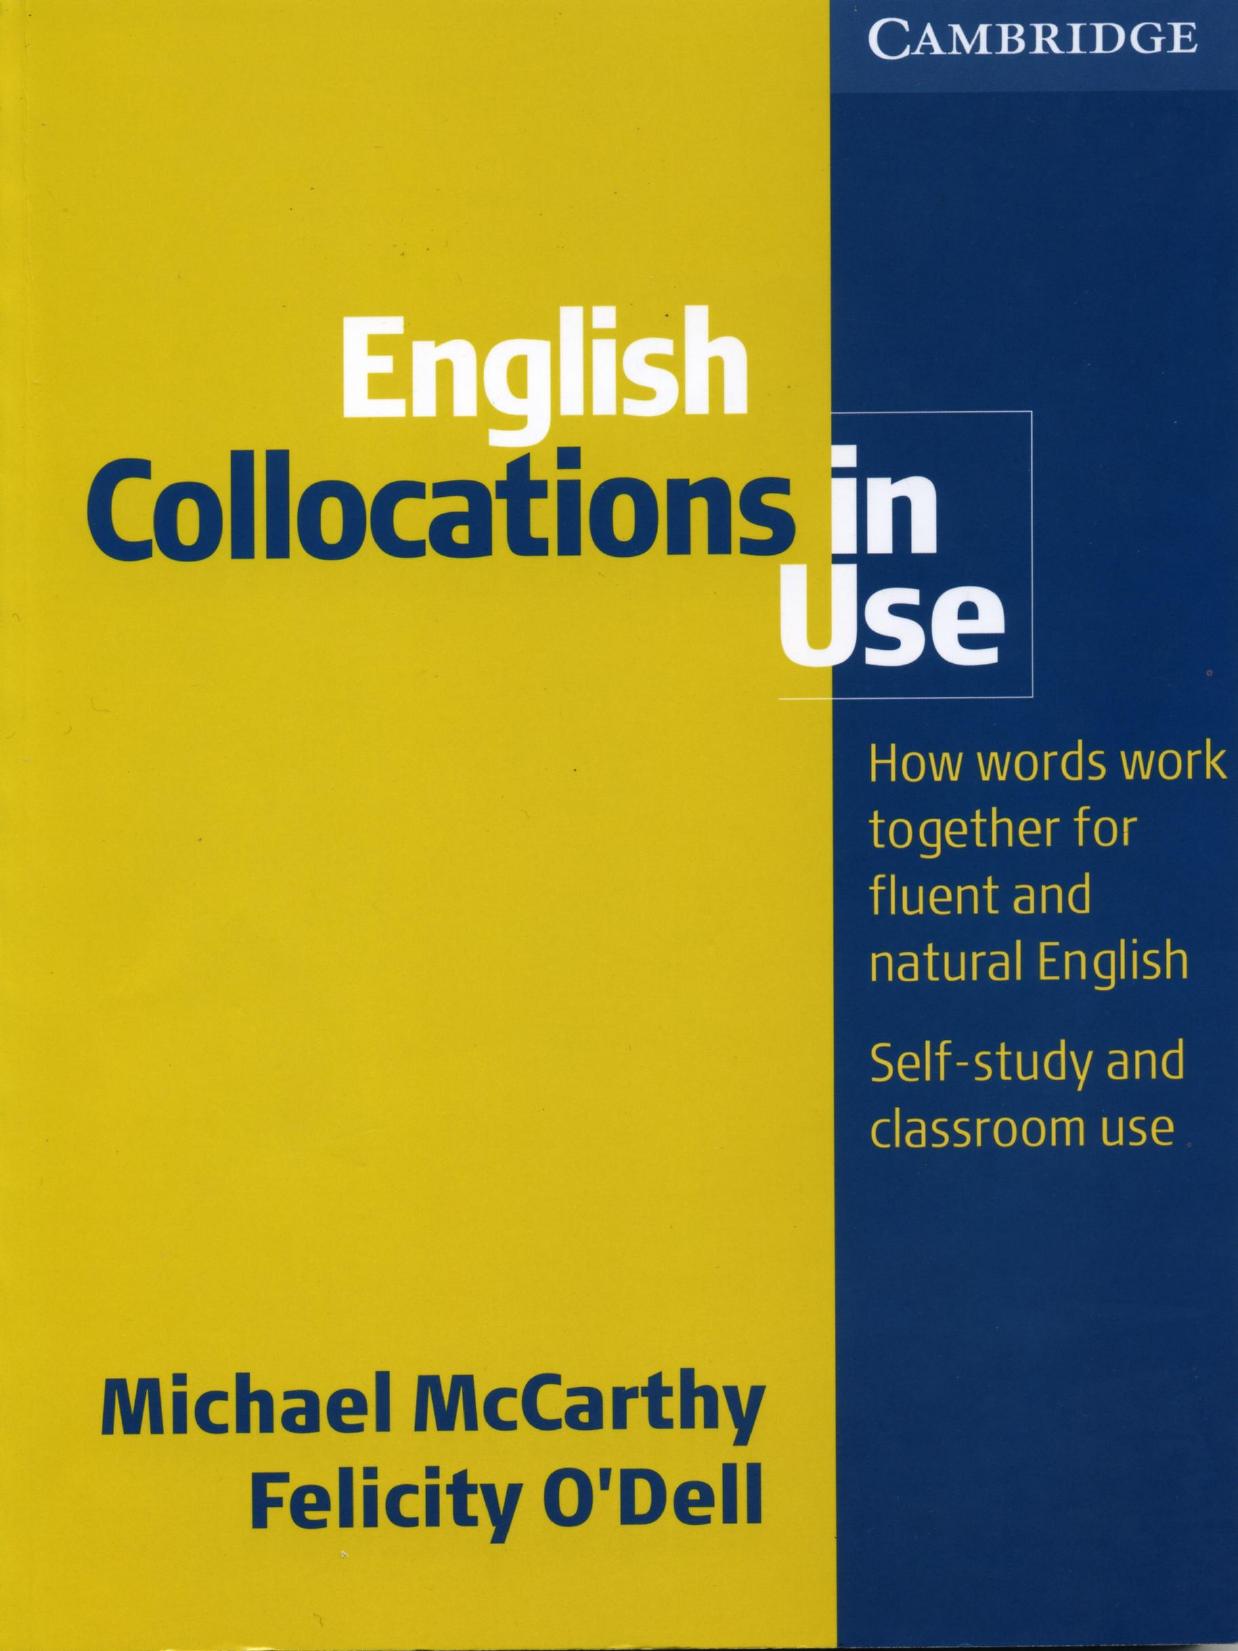 English Collocations in Use Intermediate by Michael McCarthy, Felicity ODell